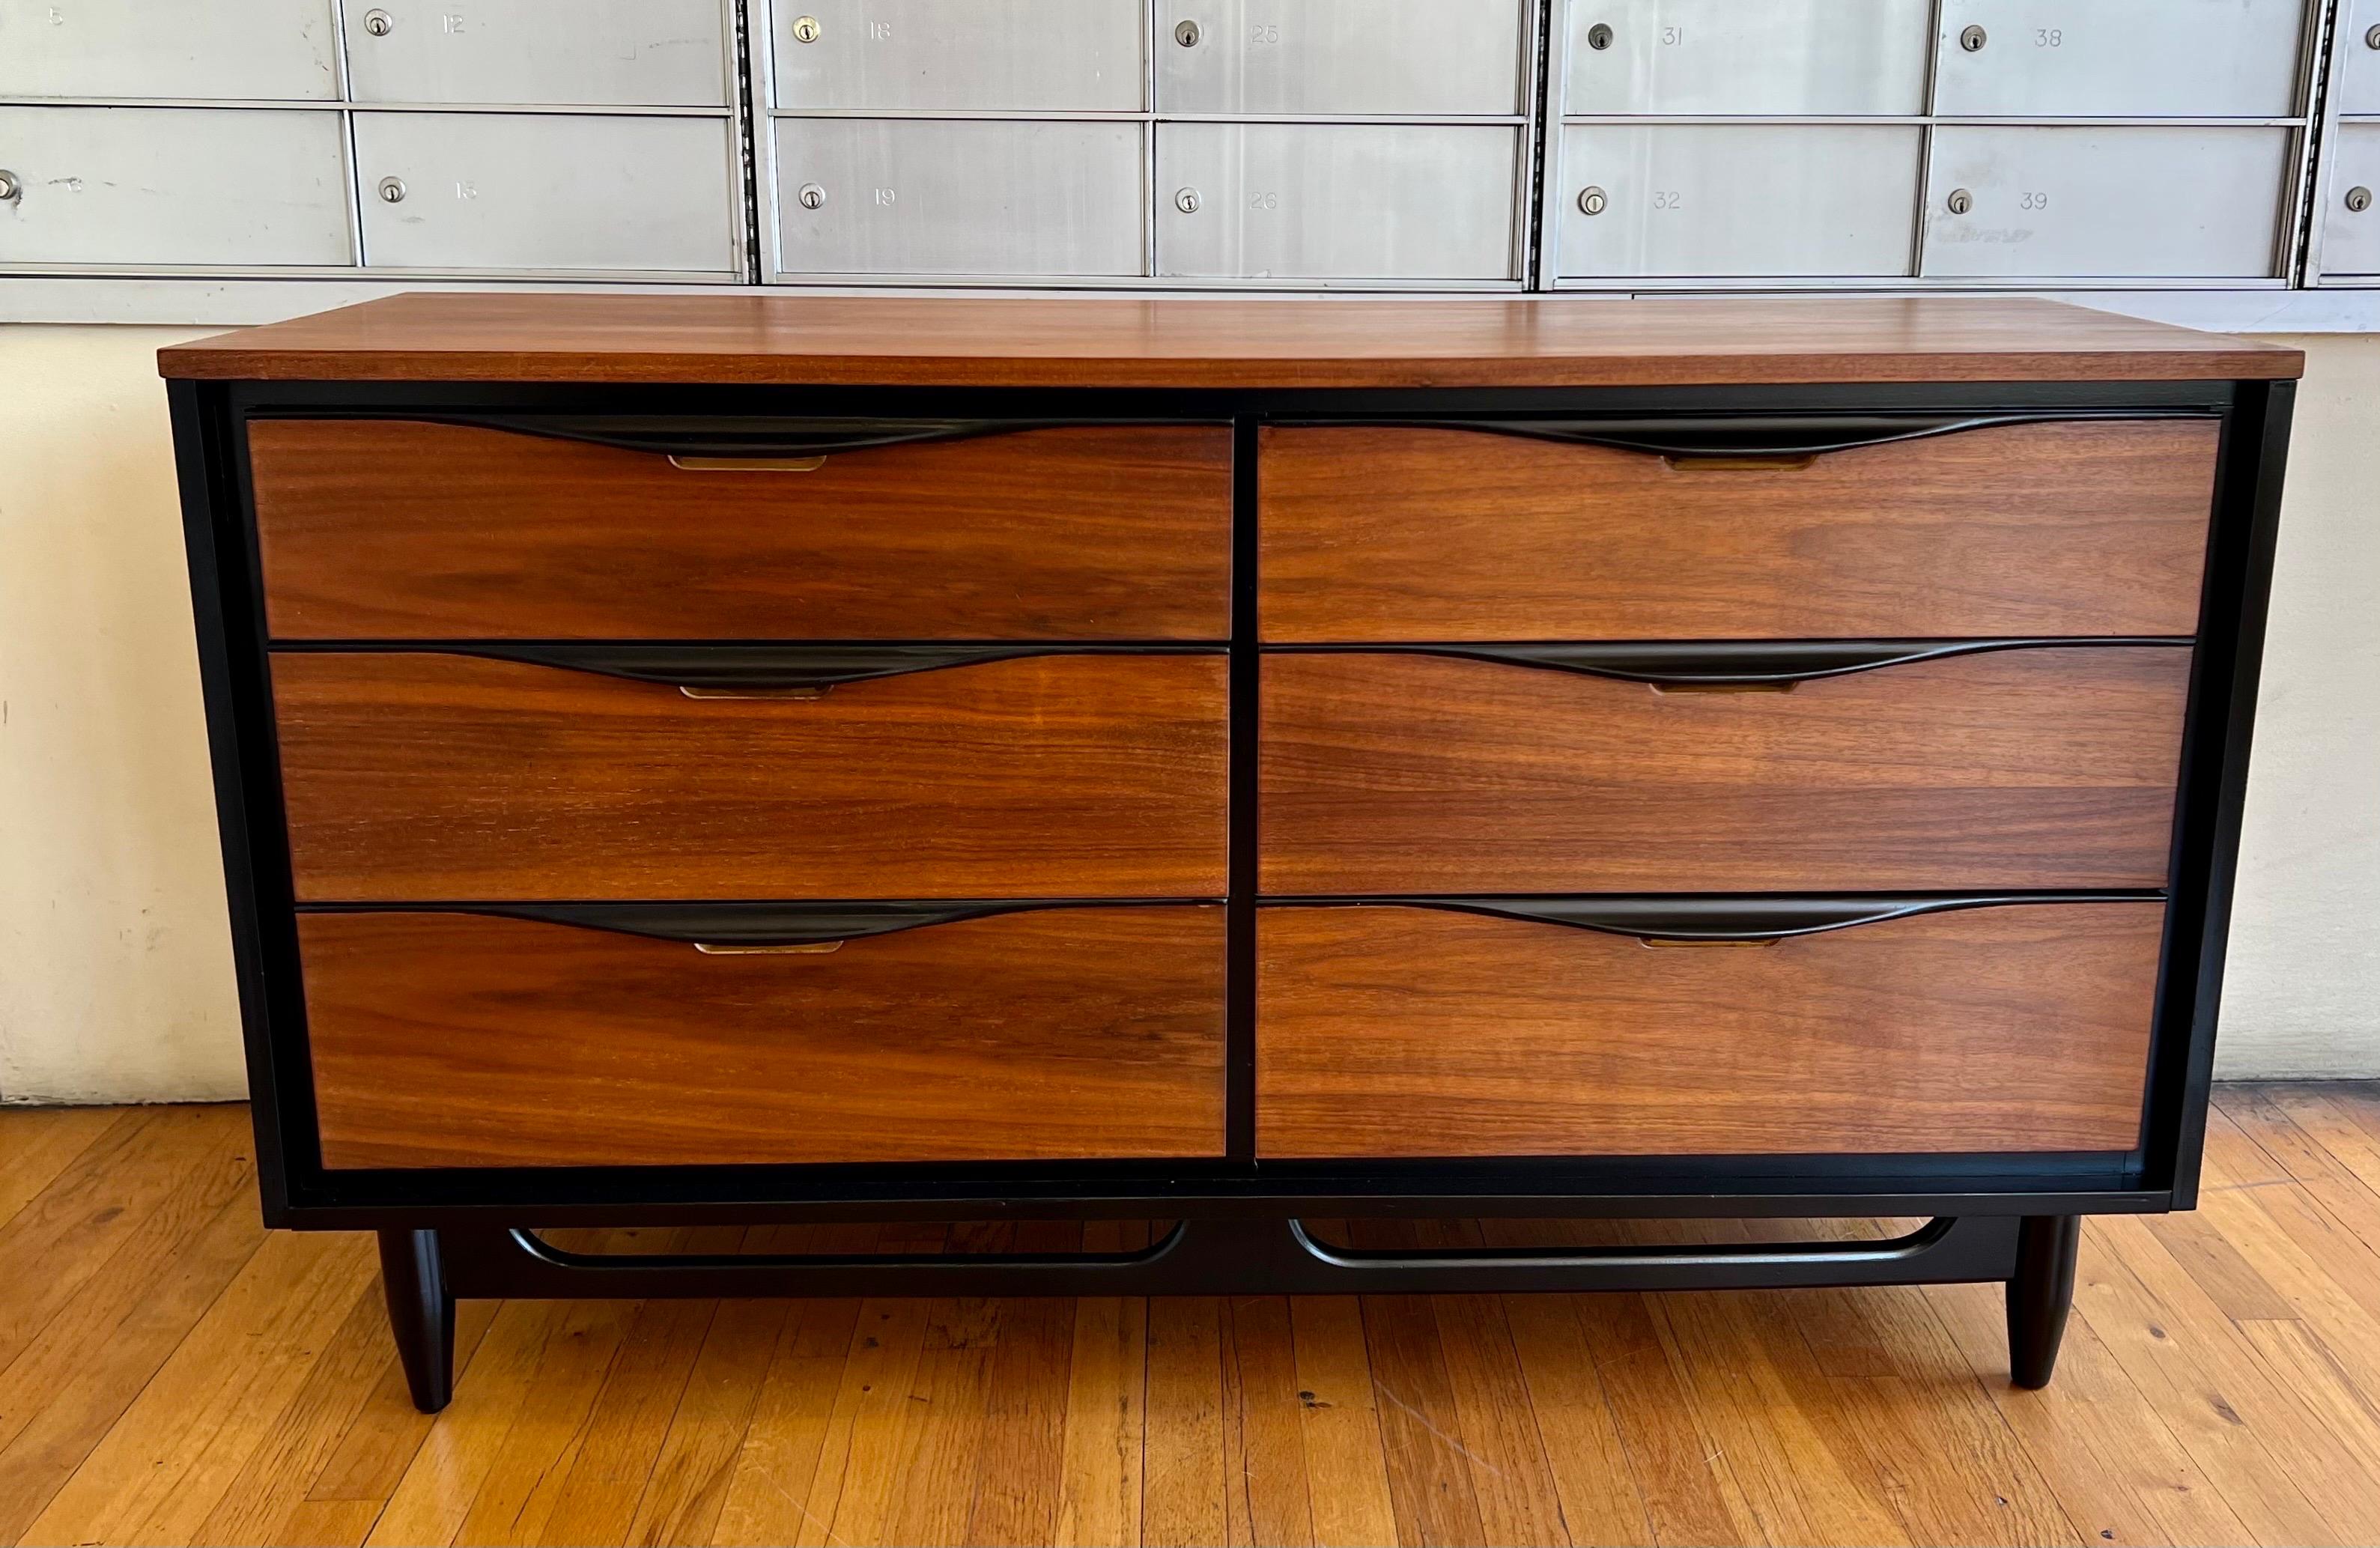 Beautiful 6-drawer dresser by Huntley quality furniture, freshly refinished in walnut with black lacquer accents great condition solid construction elegant and unique.